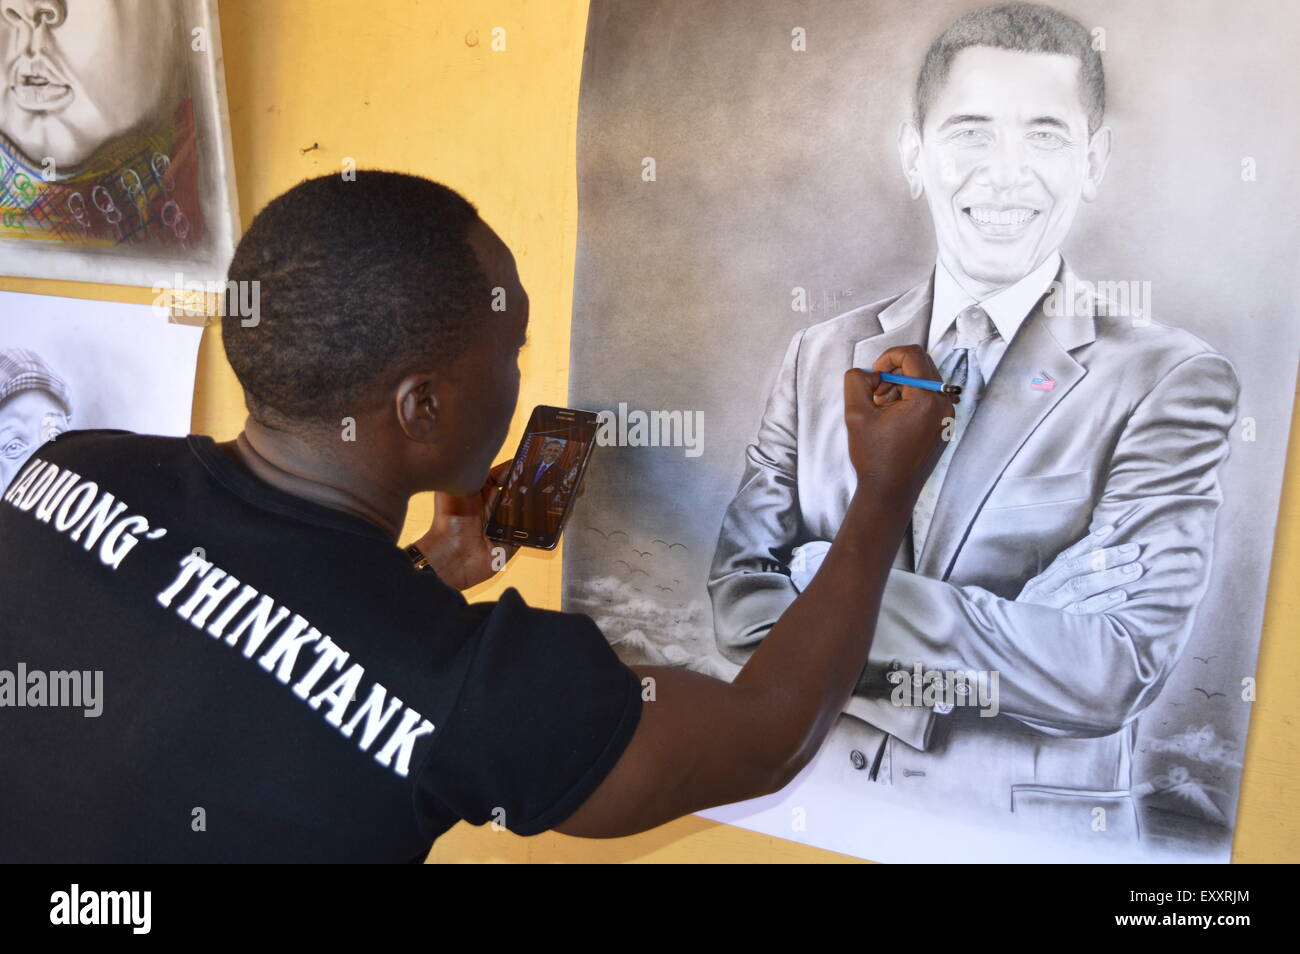 Kisumu, Kenya. 17th July, 2015. Collins Okello draws a portrait of U.S. President Barrack Obama at his Kisumu Art Gallery Studio in Kisumu, Kenya, July 17, 2015. Okello hopes to deliver the portrait to Obama as a gift. The upcoming maiden visit by the U.S. President Barack Obama to the land of his ancestors has elicited mixed reactions from citizens of all stripes. Obama will grace the Global Entrepreneurship Summit in Nairobi on July 25-26 in Nairobi. Credit:  Simbi Kusimba/Xinhua/Alamy Live News Stock Photo